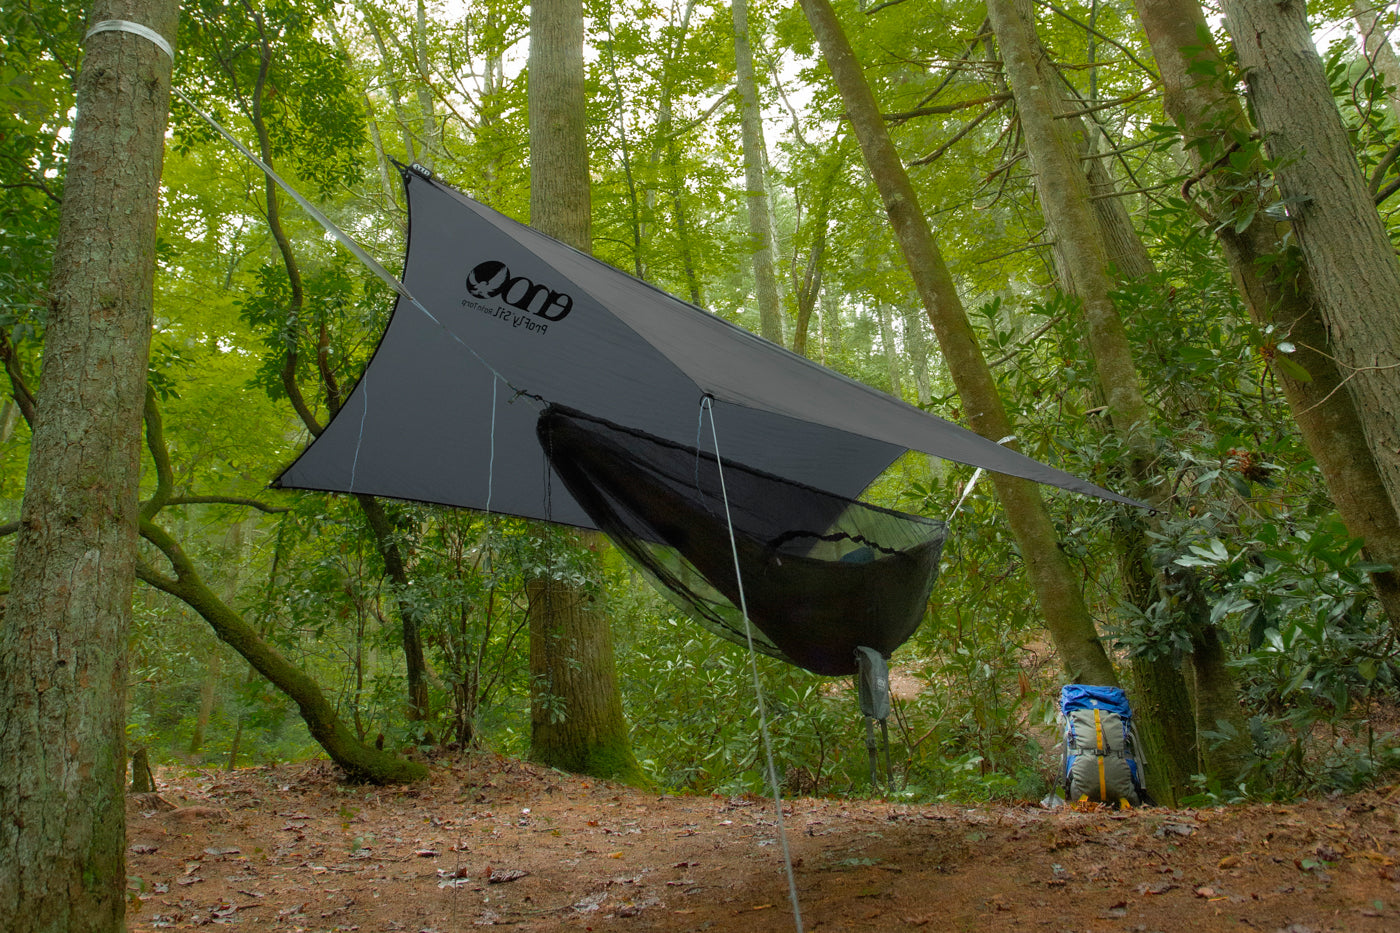 An ENO SubLink Hammock System is hung up in a lush green forest.